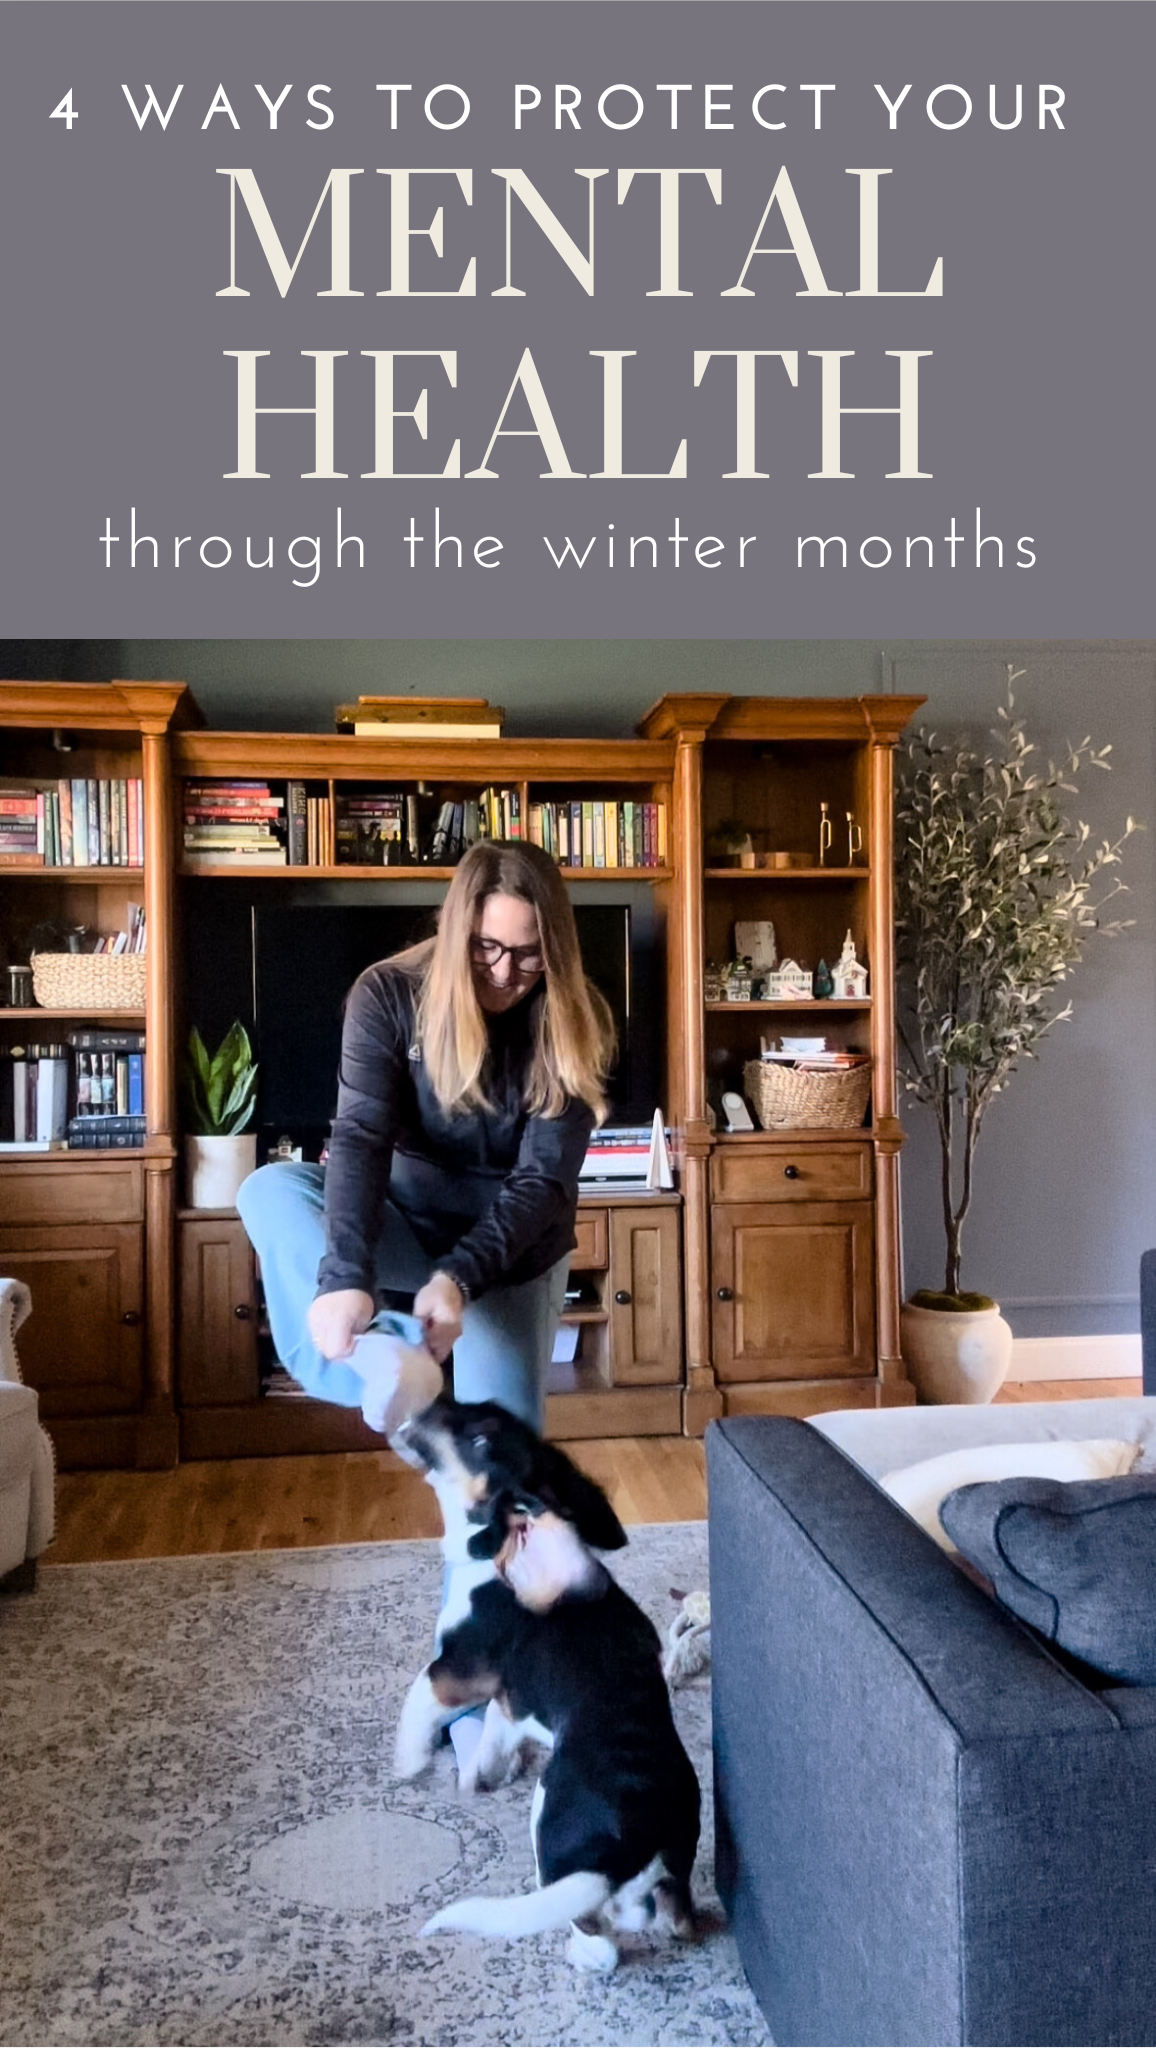 4 ways to protect your mental health through the winter months